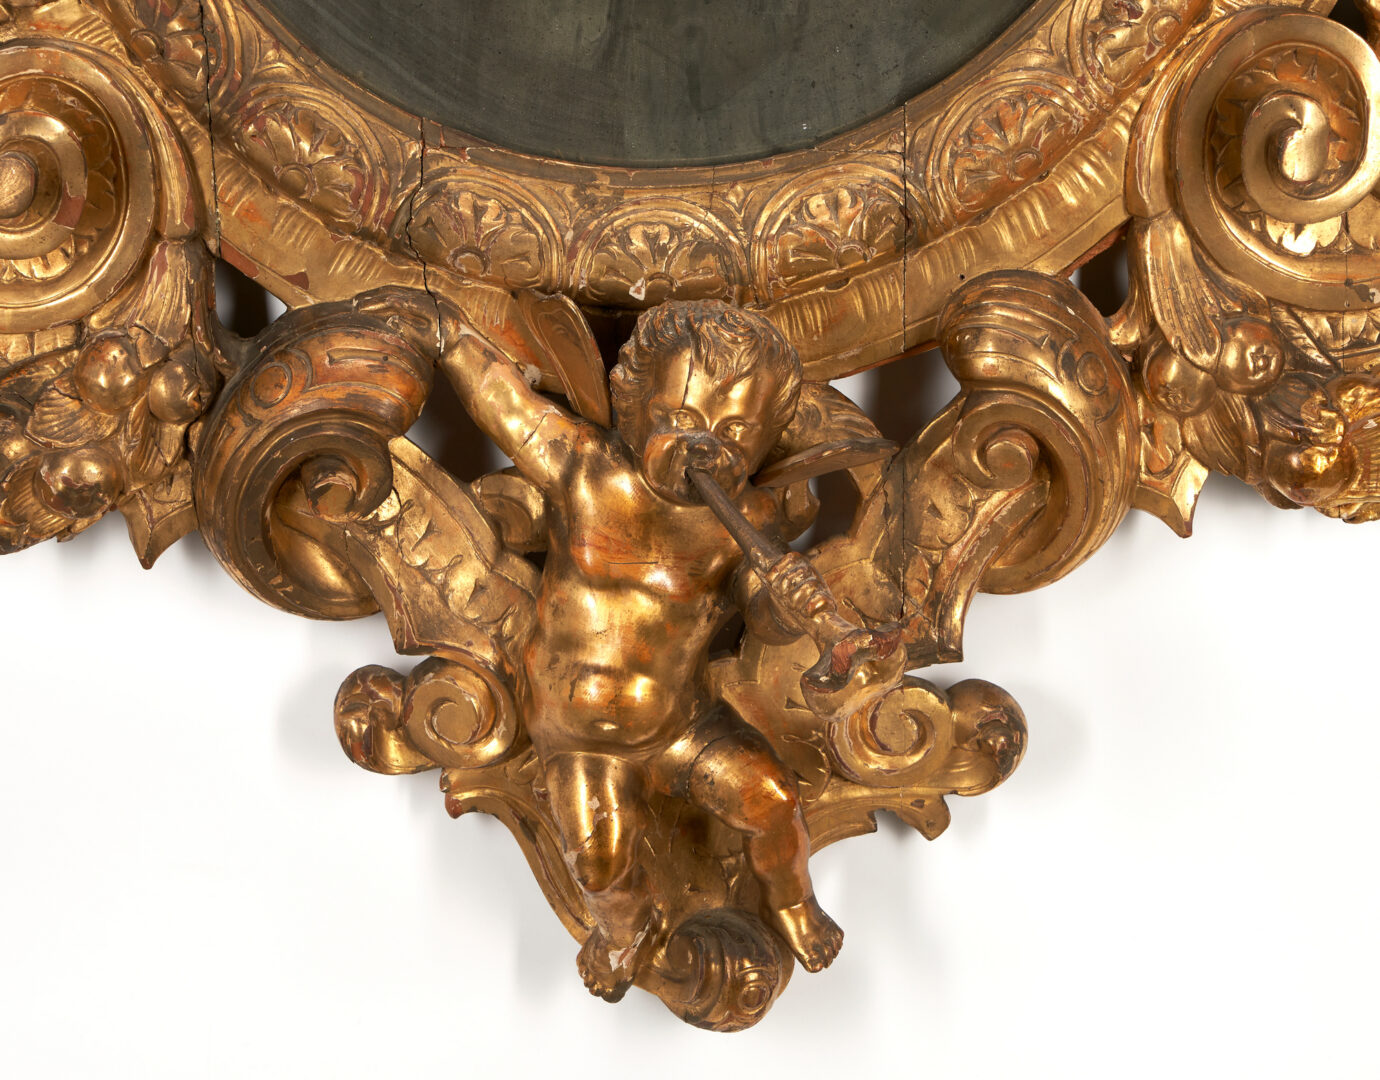 Lot 239: Very Large Italian Baroque Style Giltwood Mirror with Cherubs